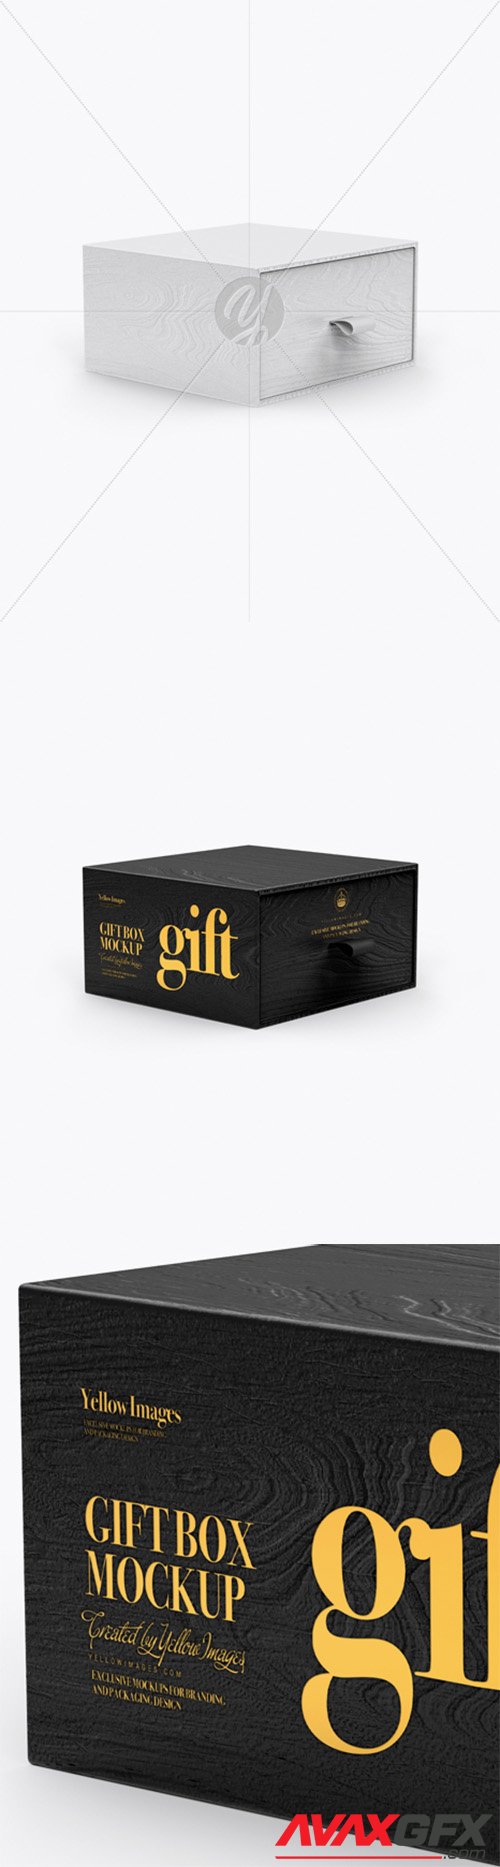 Download Opened Wooden Gift Box Mockup Half Side View 22339 Avaxgfx All Downloads That You Need In One Place Graphic From Nitroflare Rapidgator Yellowimages Mockups